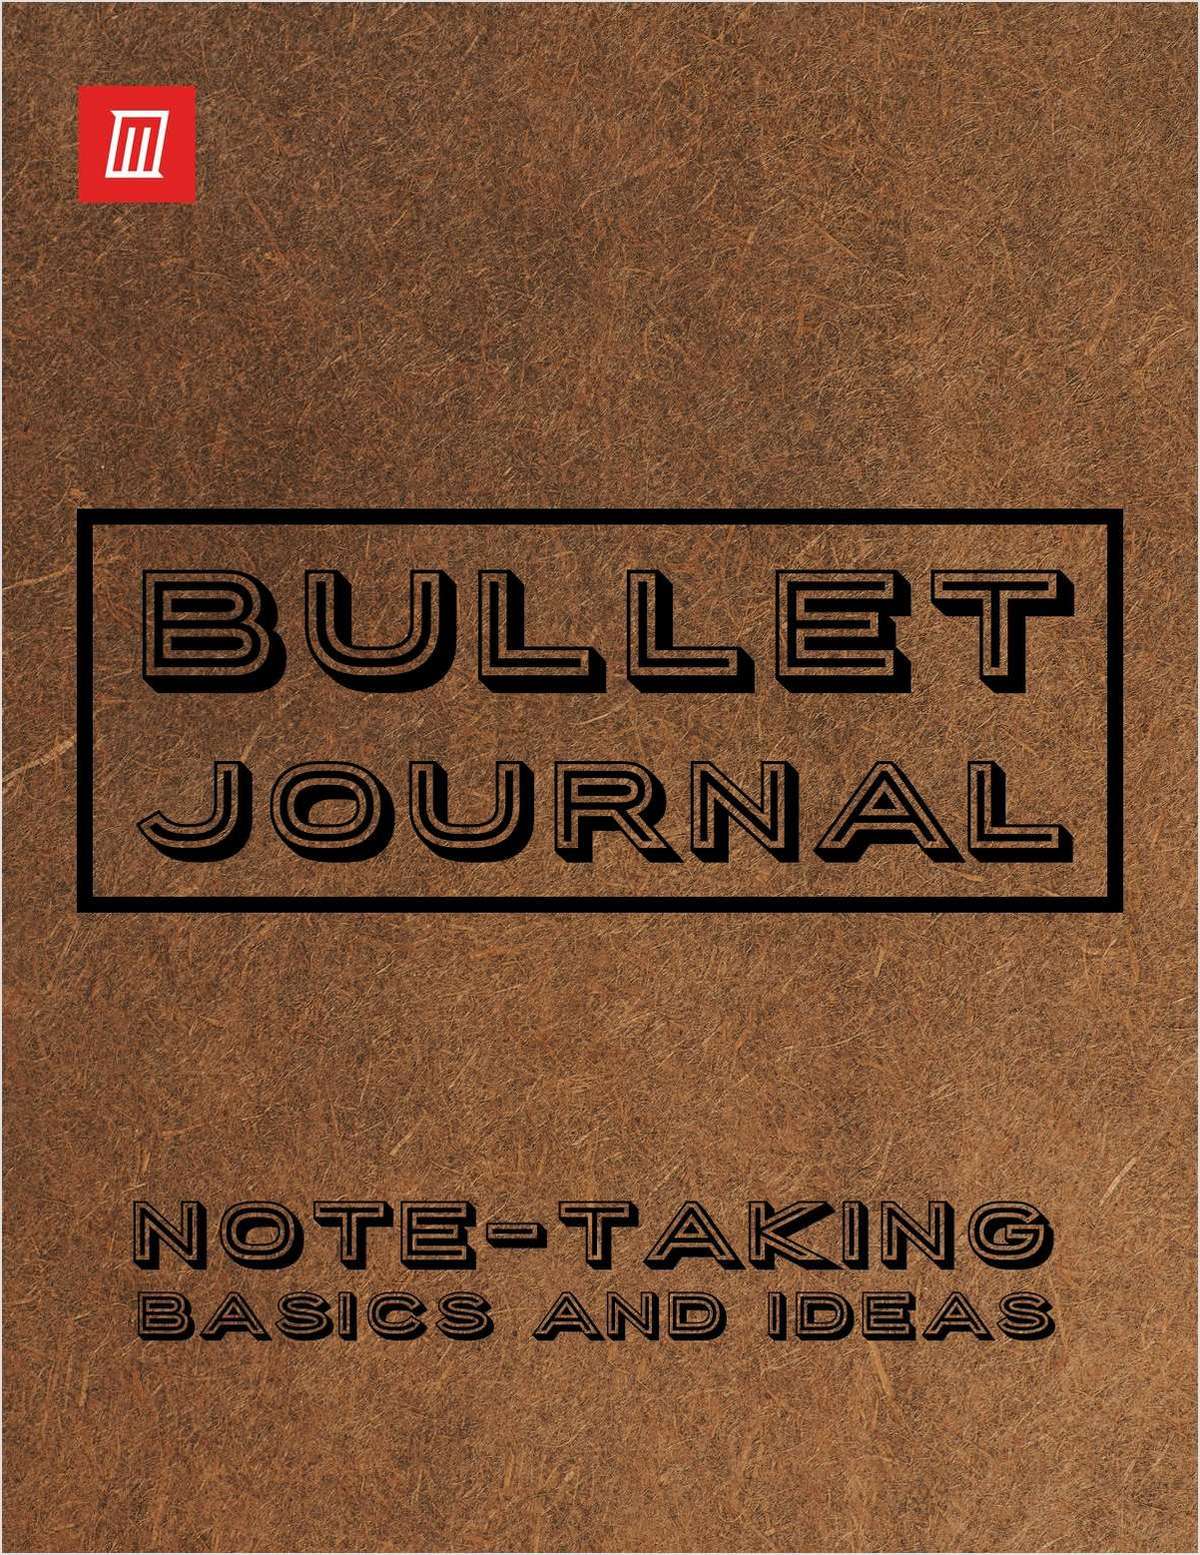 Bullet Journal Basics and Ideas for Quick Note-Taking